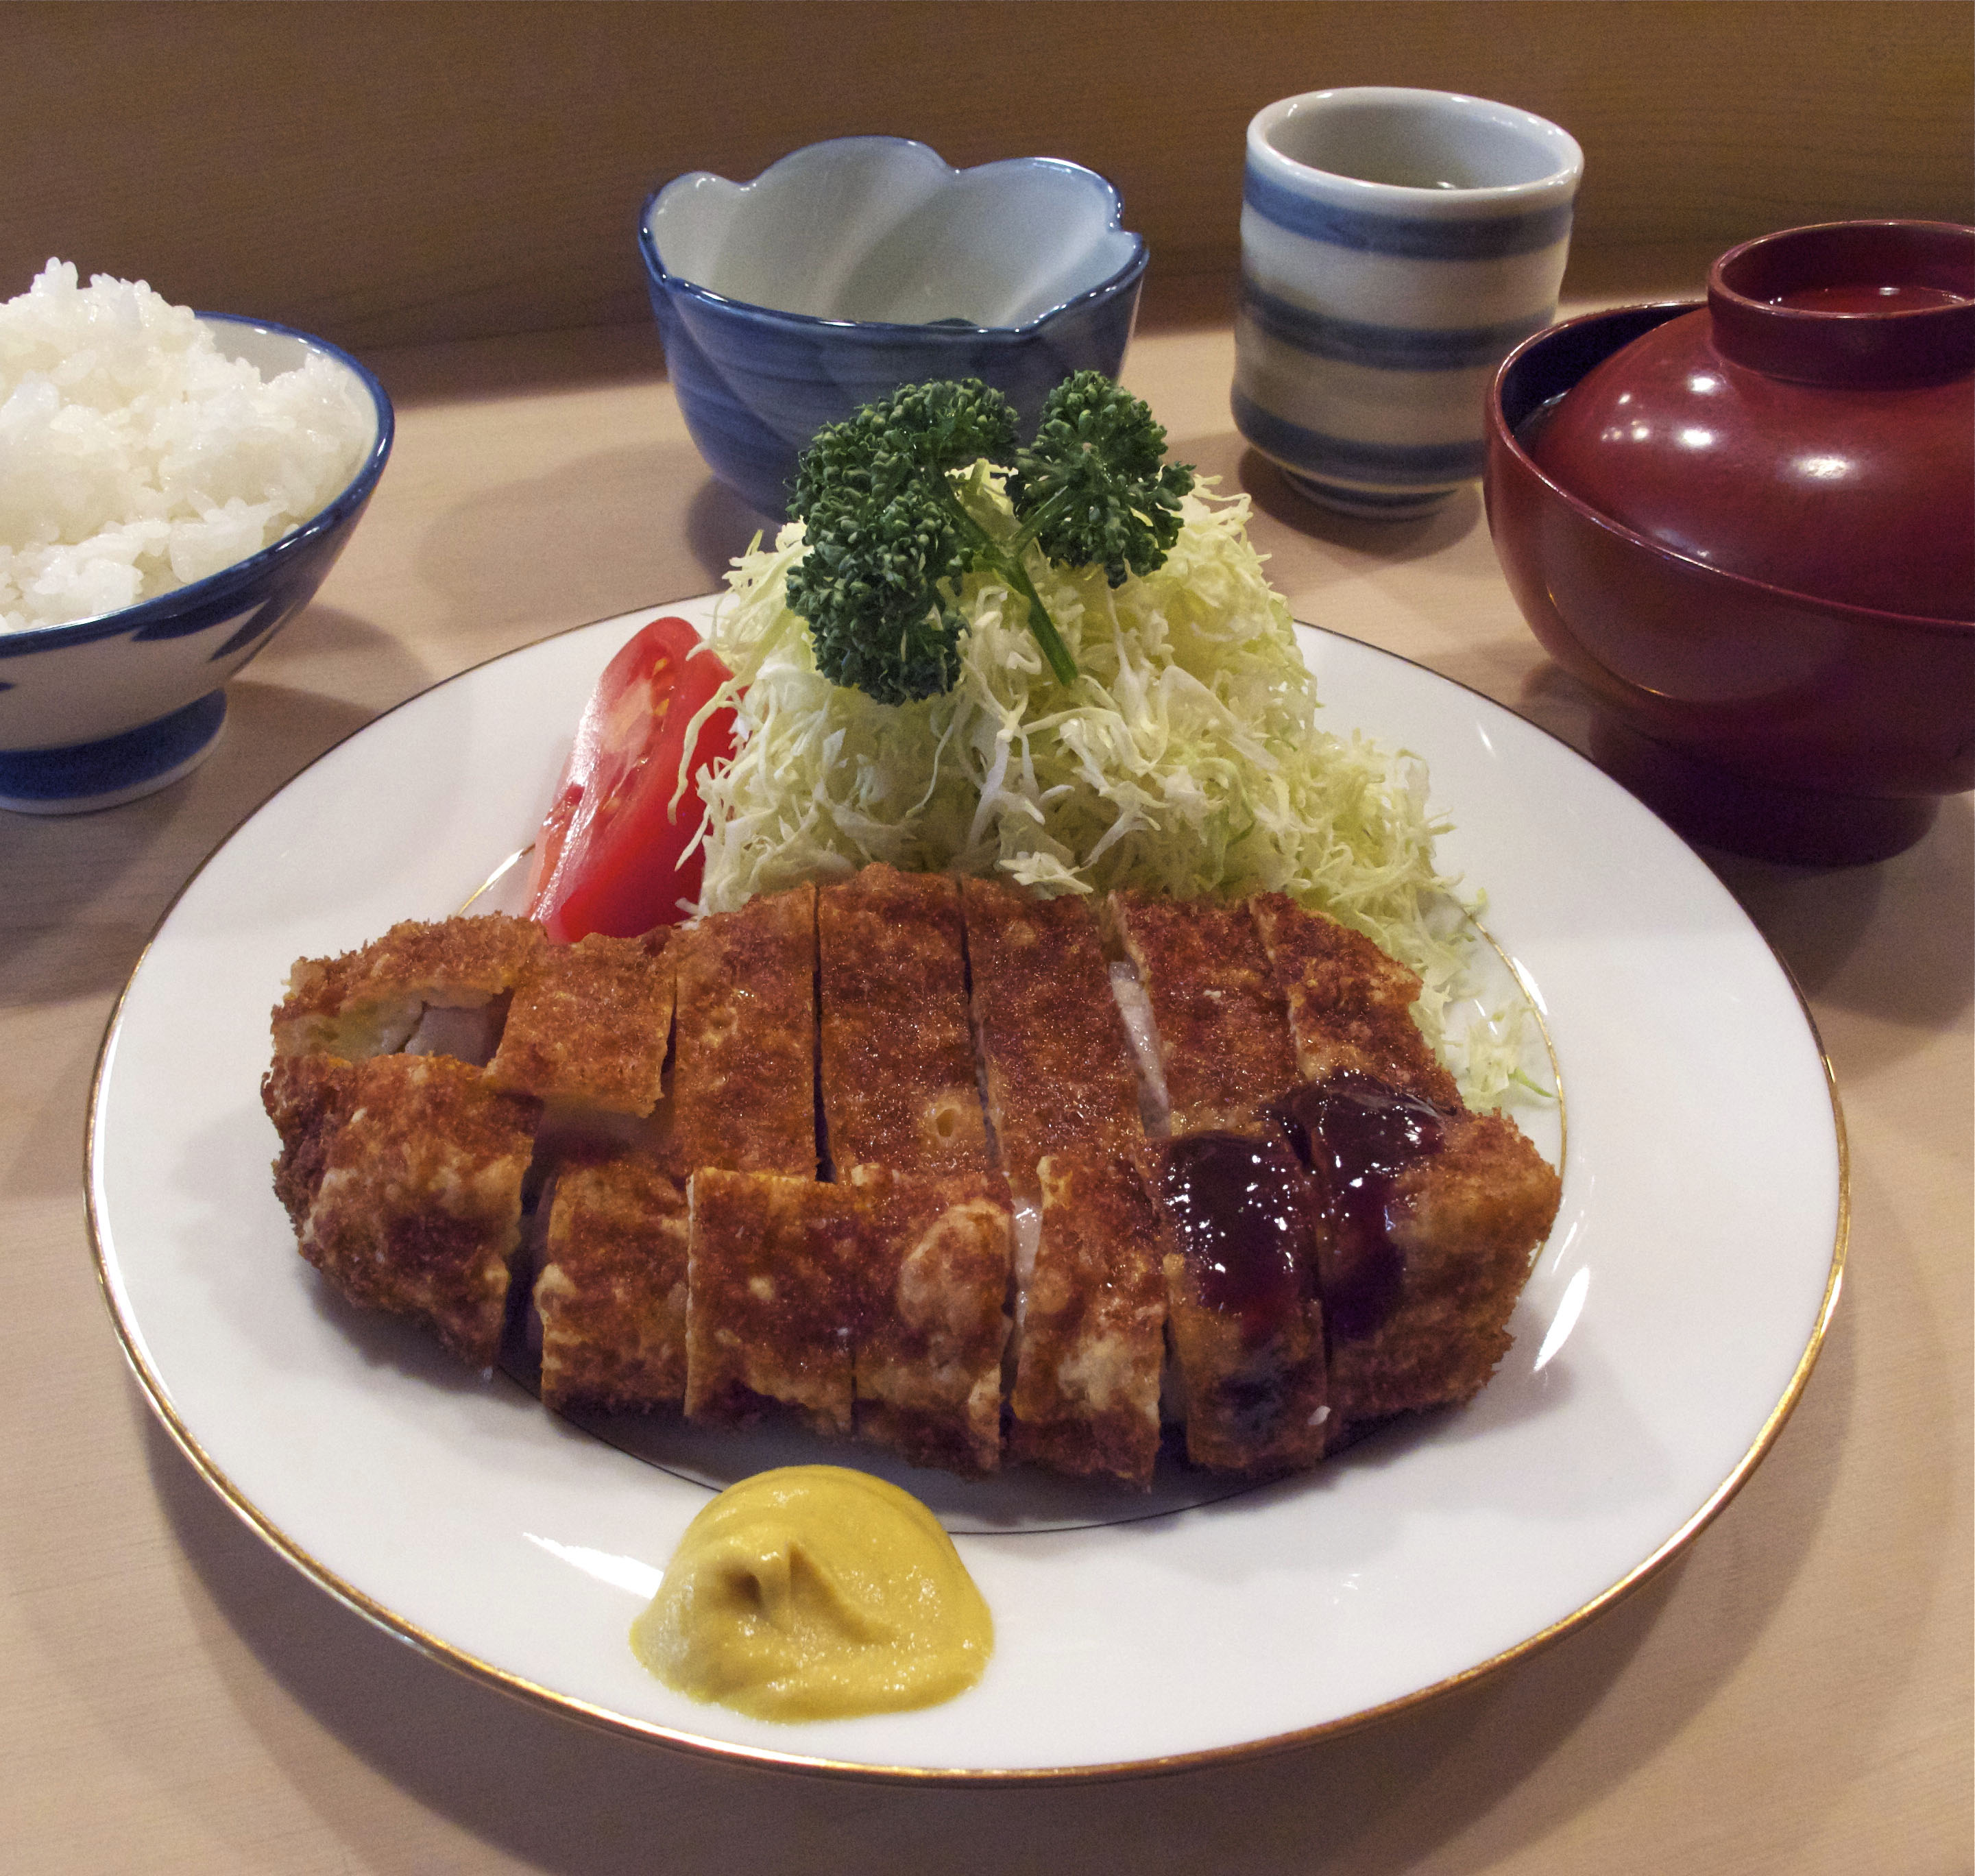 Katsu cradle: Tonki has prepared its distinctive tonkatsu (deep-fried breaded pork cutlets) since 1939. The cutlets are deep-fried slowly and taste more home-cooked than those at other more modern restaurants. | ROBBIE SWINNERTON PHOTOS